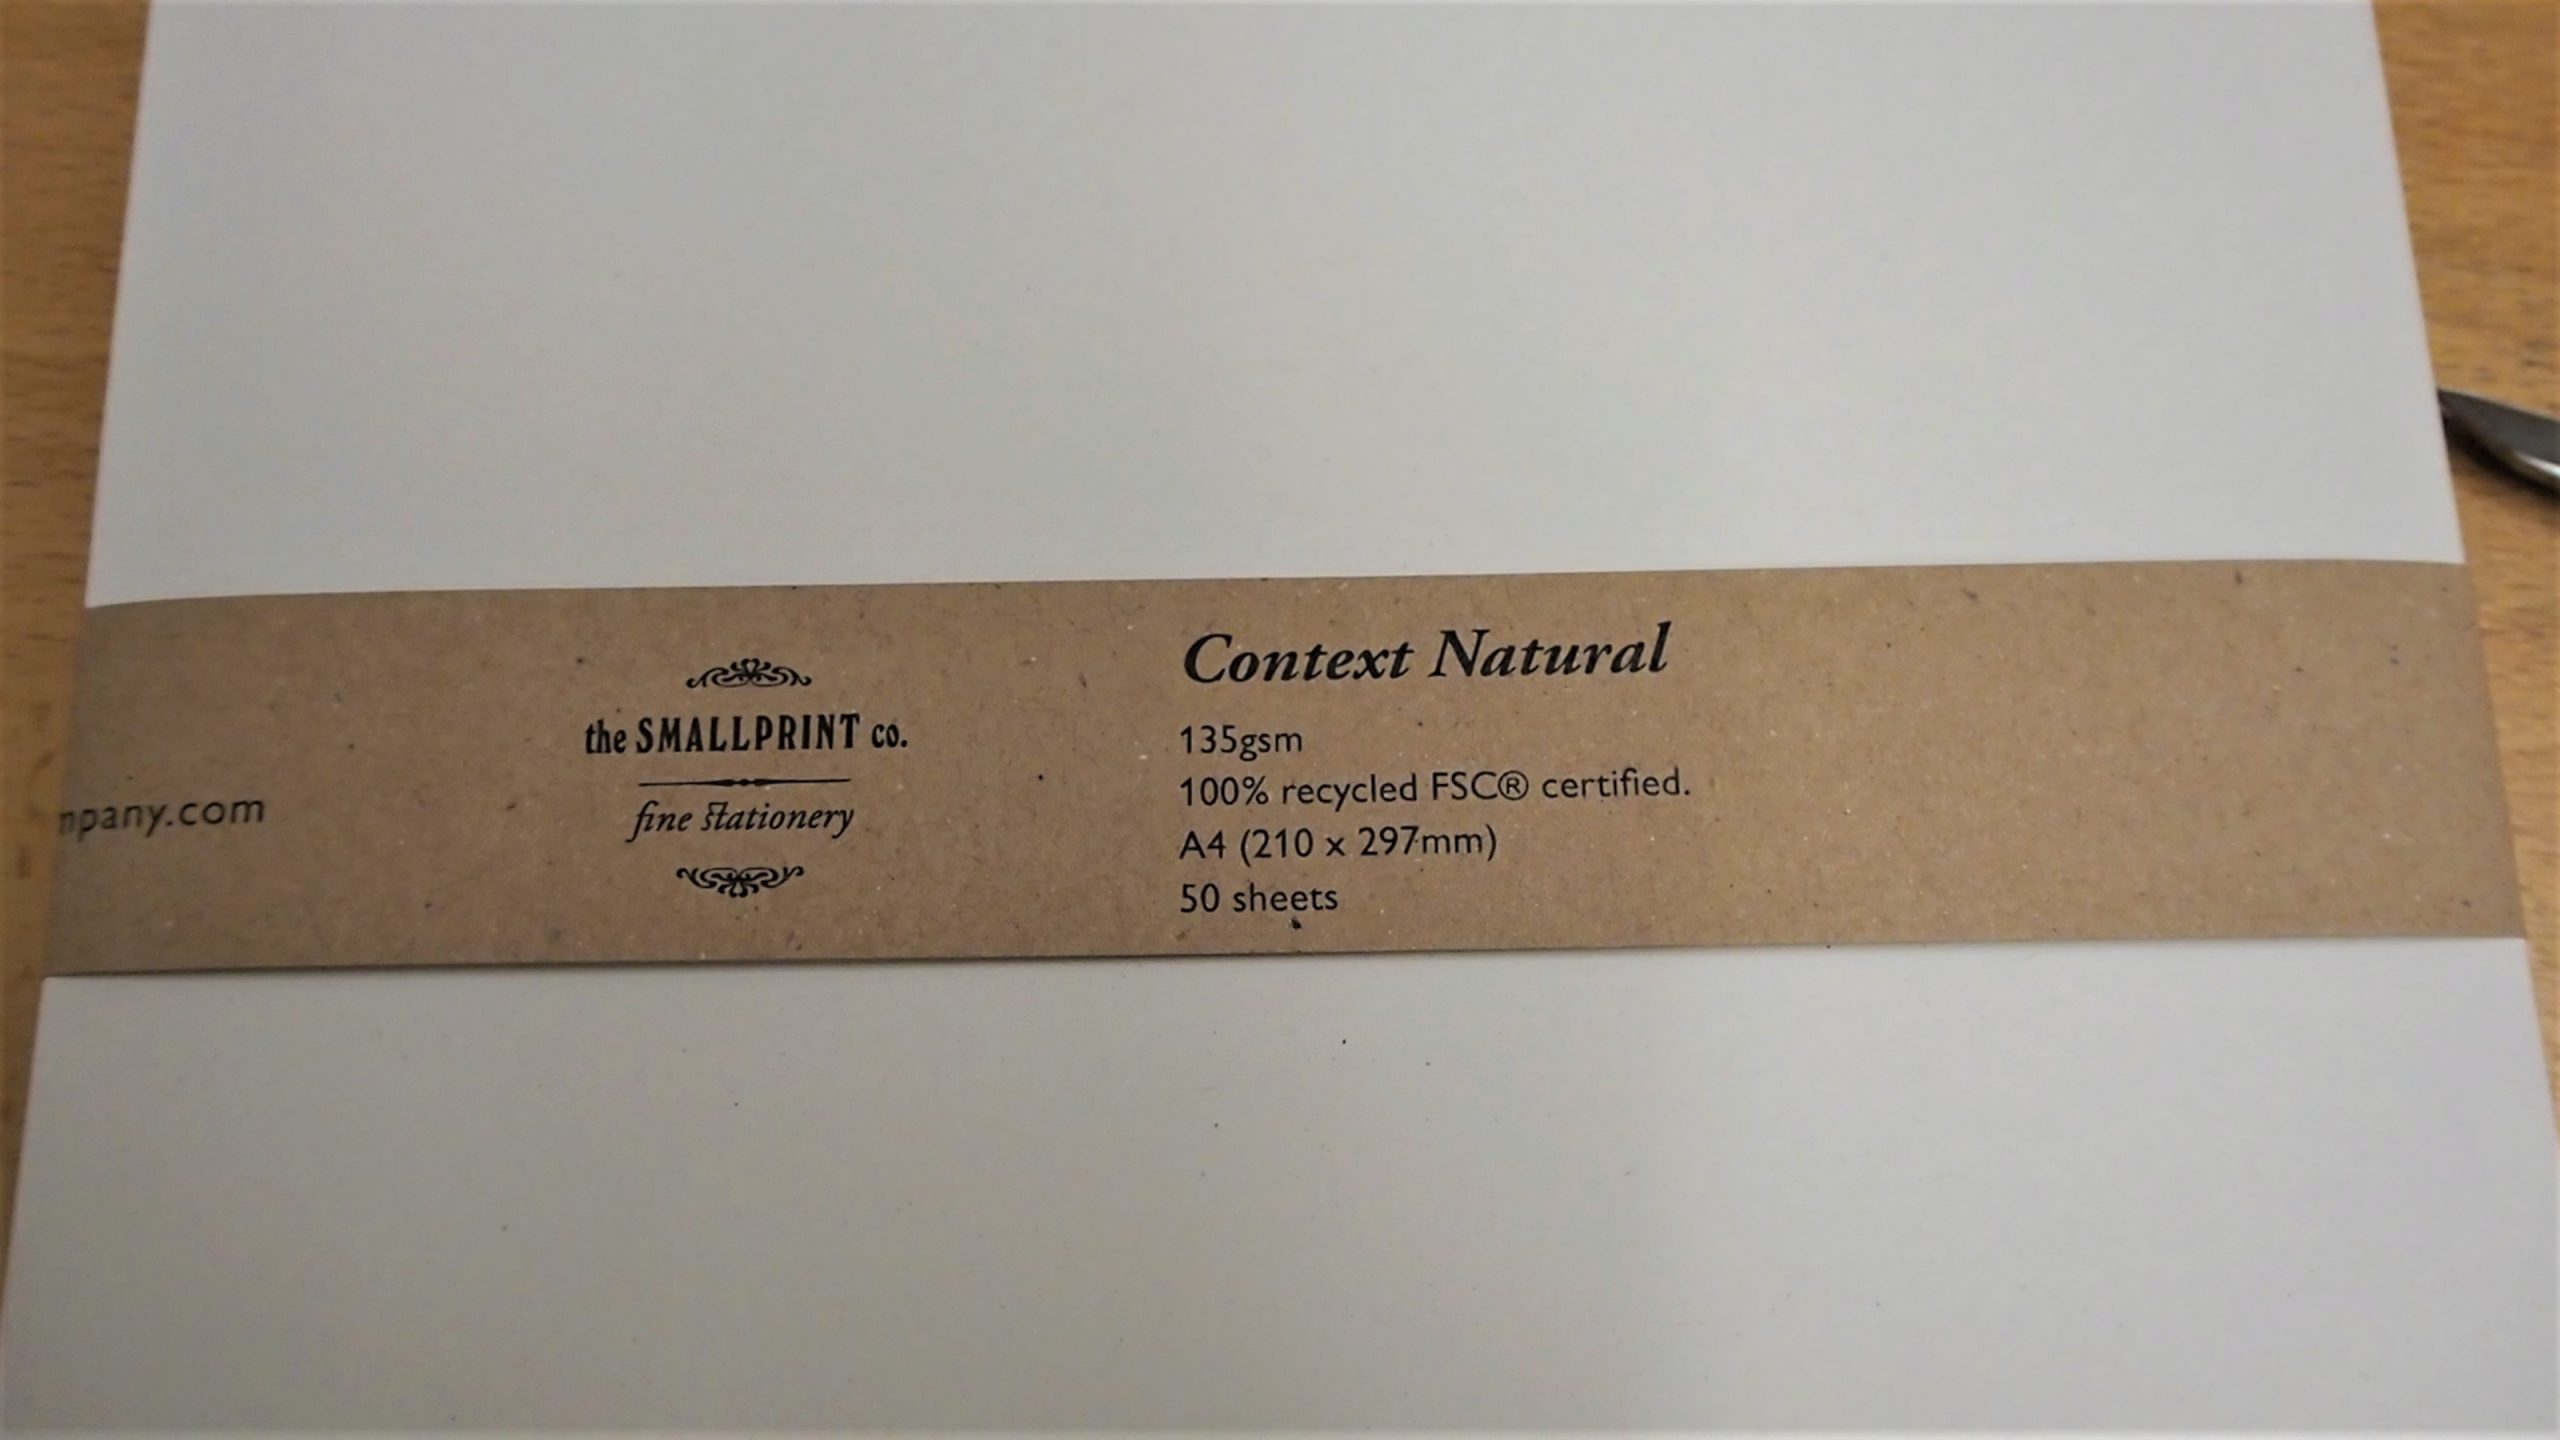 100% Recycled Paper Packing Sheets, 24 x 24, Natural, 20/Pack - Reliable  Paper